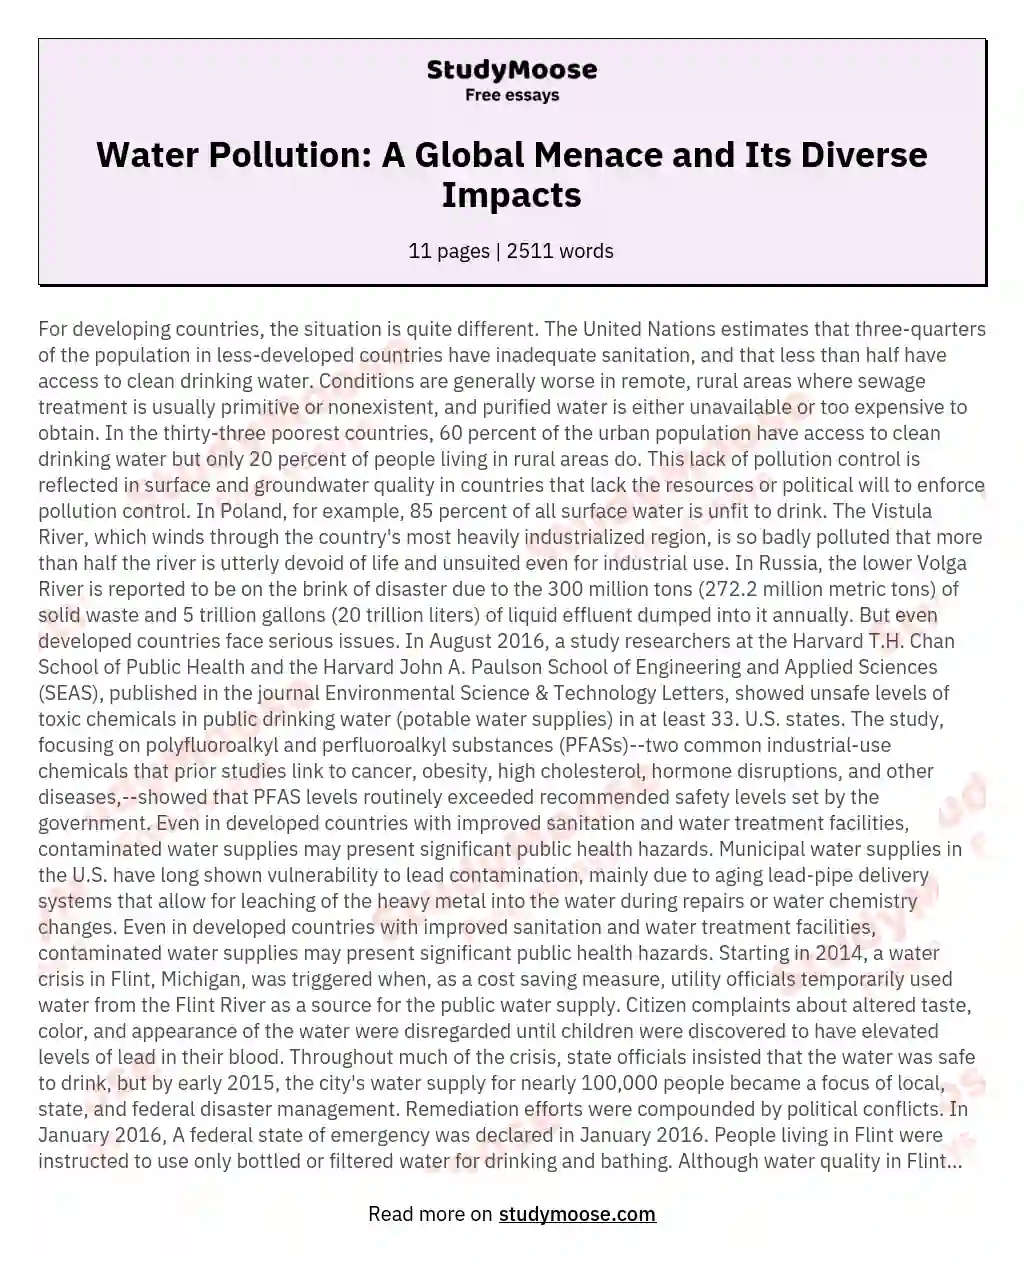 Water Pollution: A Global Menace and Its Diverse Impacts essay